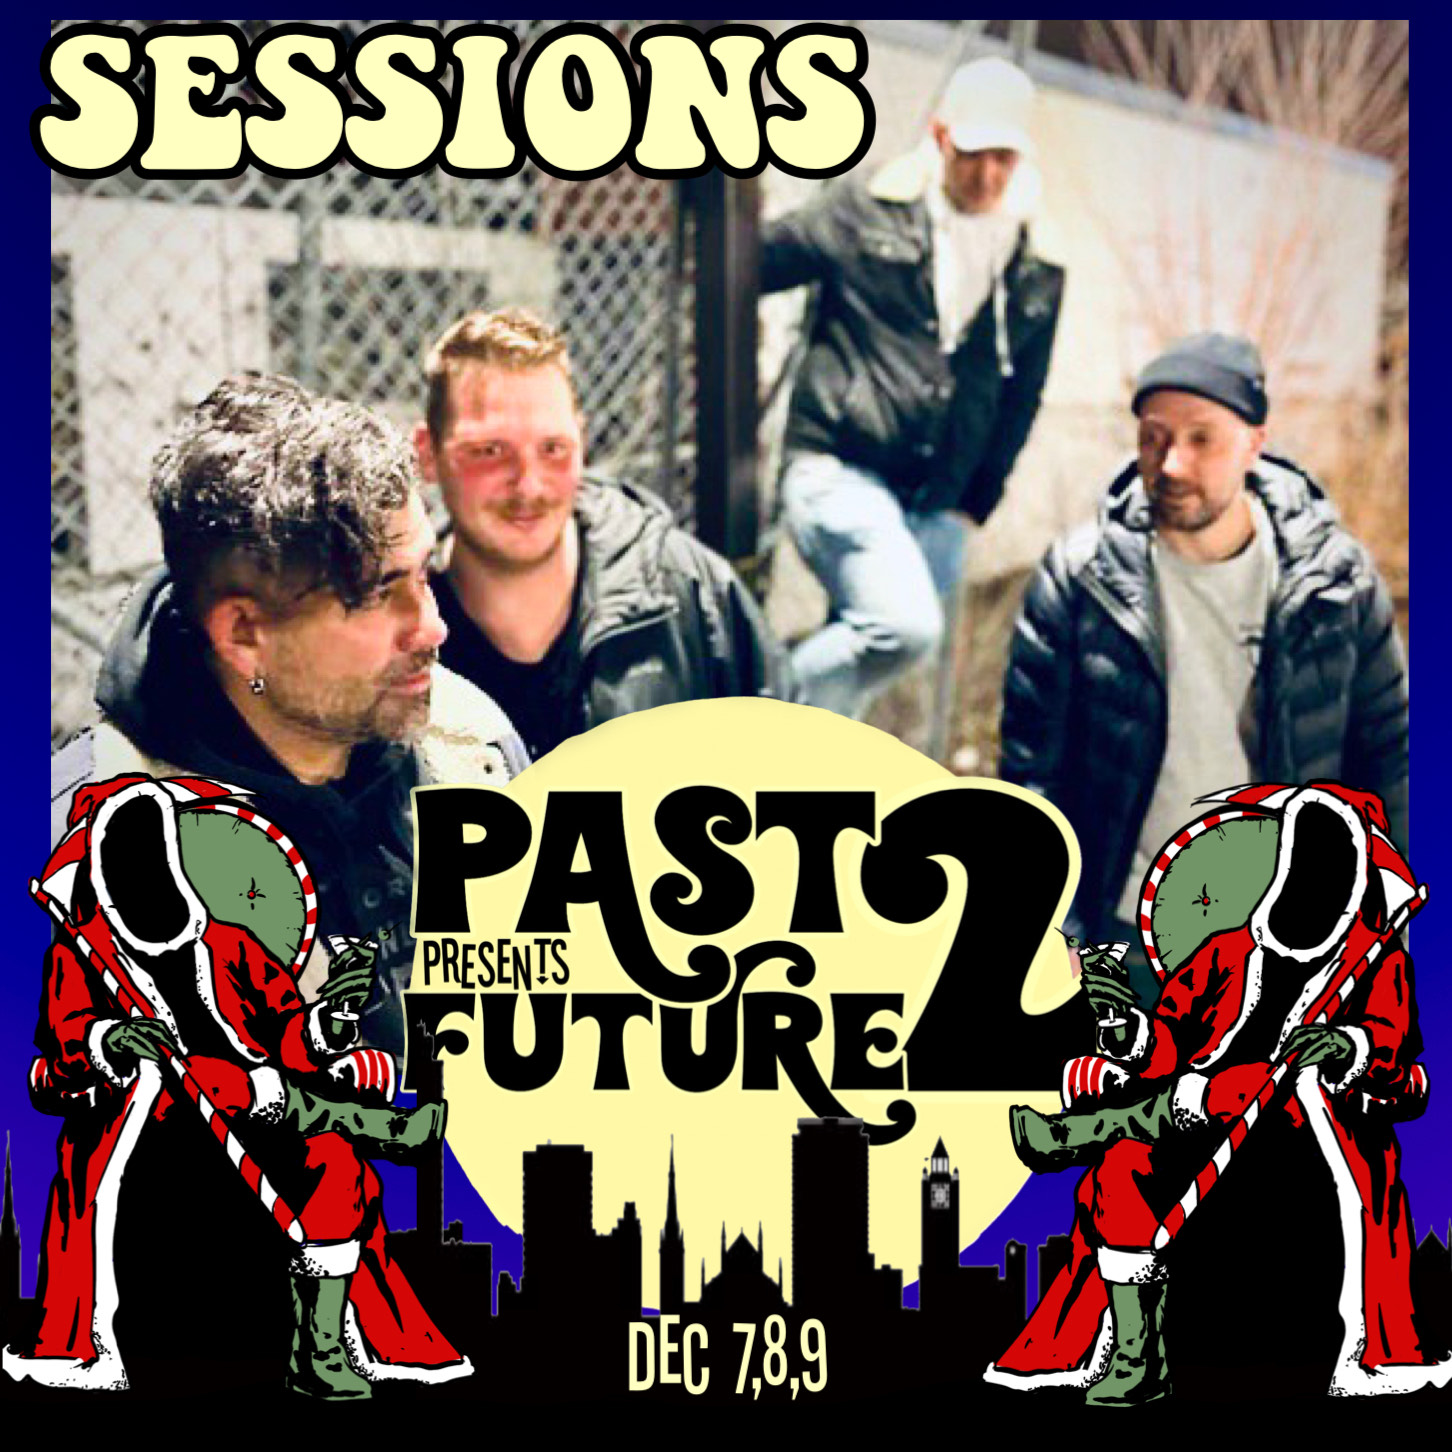 Sessions at Past Presents Future